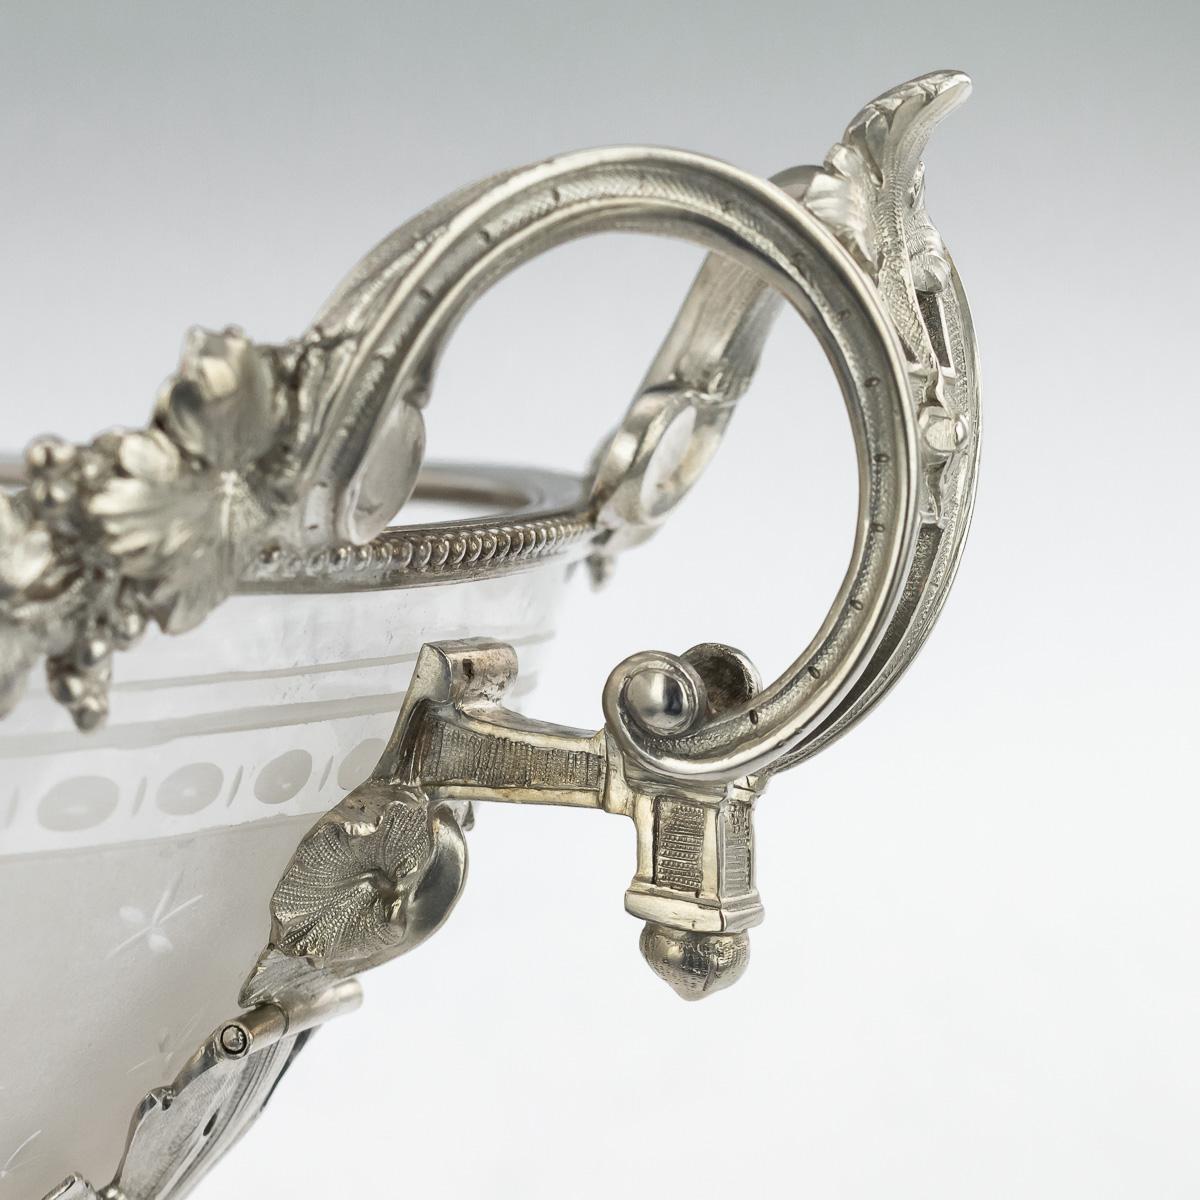 19th Centurty French Empire Solid Silver & Glass Bowl, Paris, c.1870 10